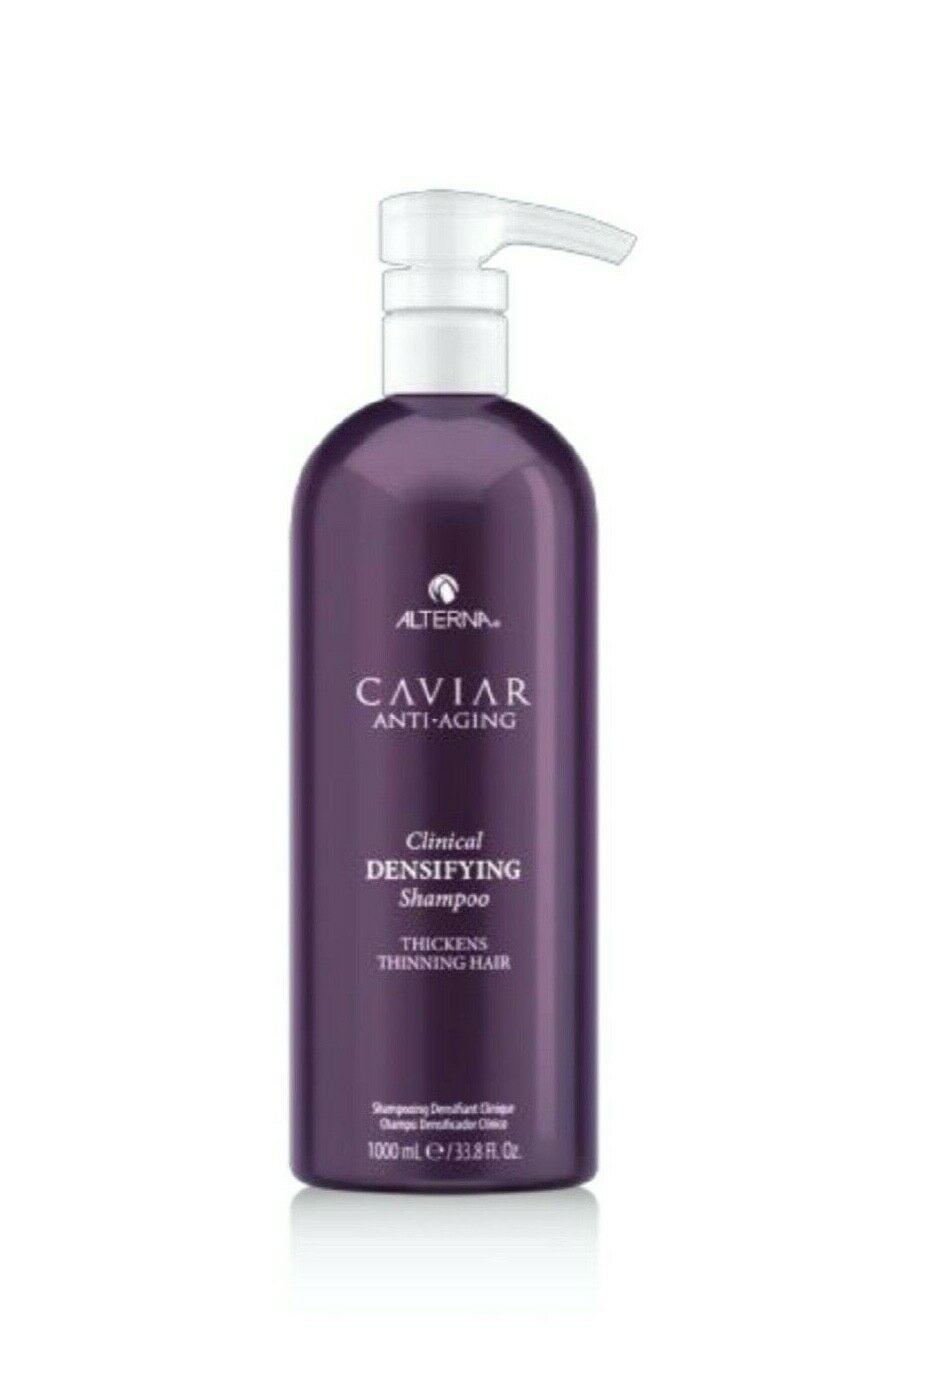 Alterna Caviar Anti-Aging Clinical Densifying Shampoo, For Fine, Hair, Thickens Hair, Protects Scalp, Sulfate Free 33.8 Fl Oz - Walmart.com